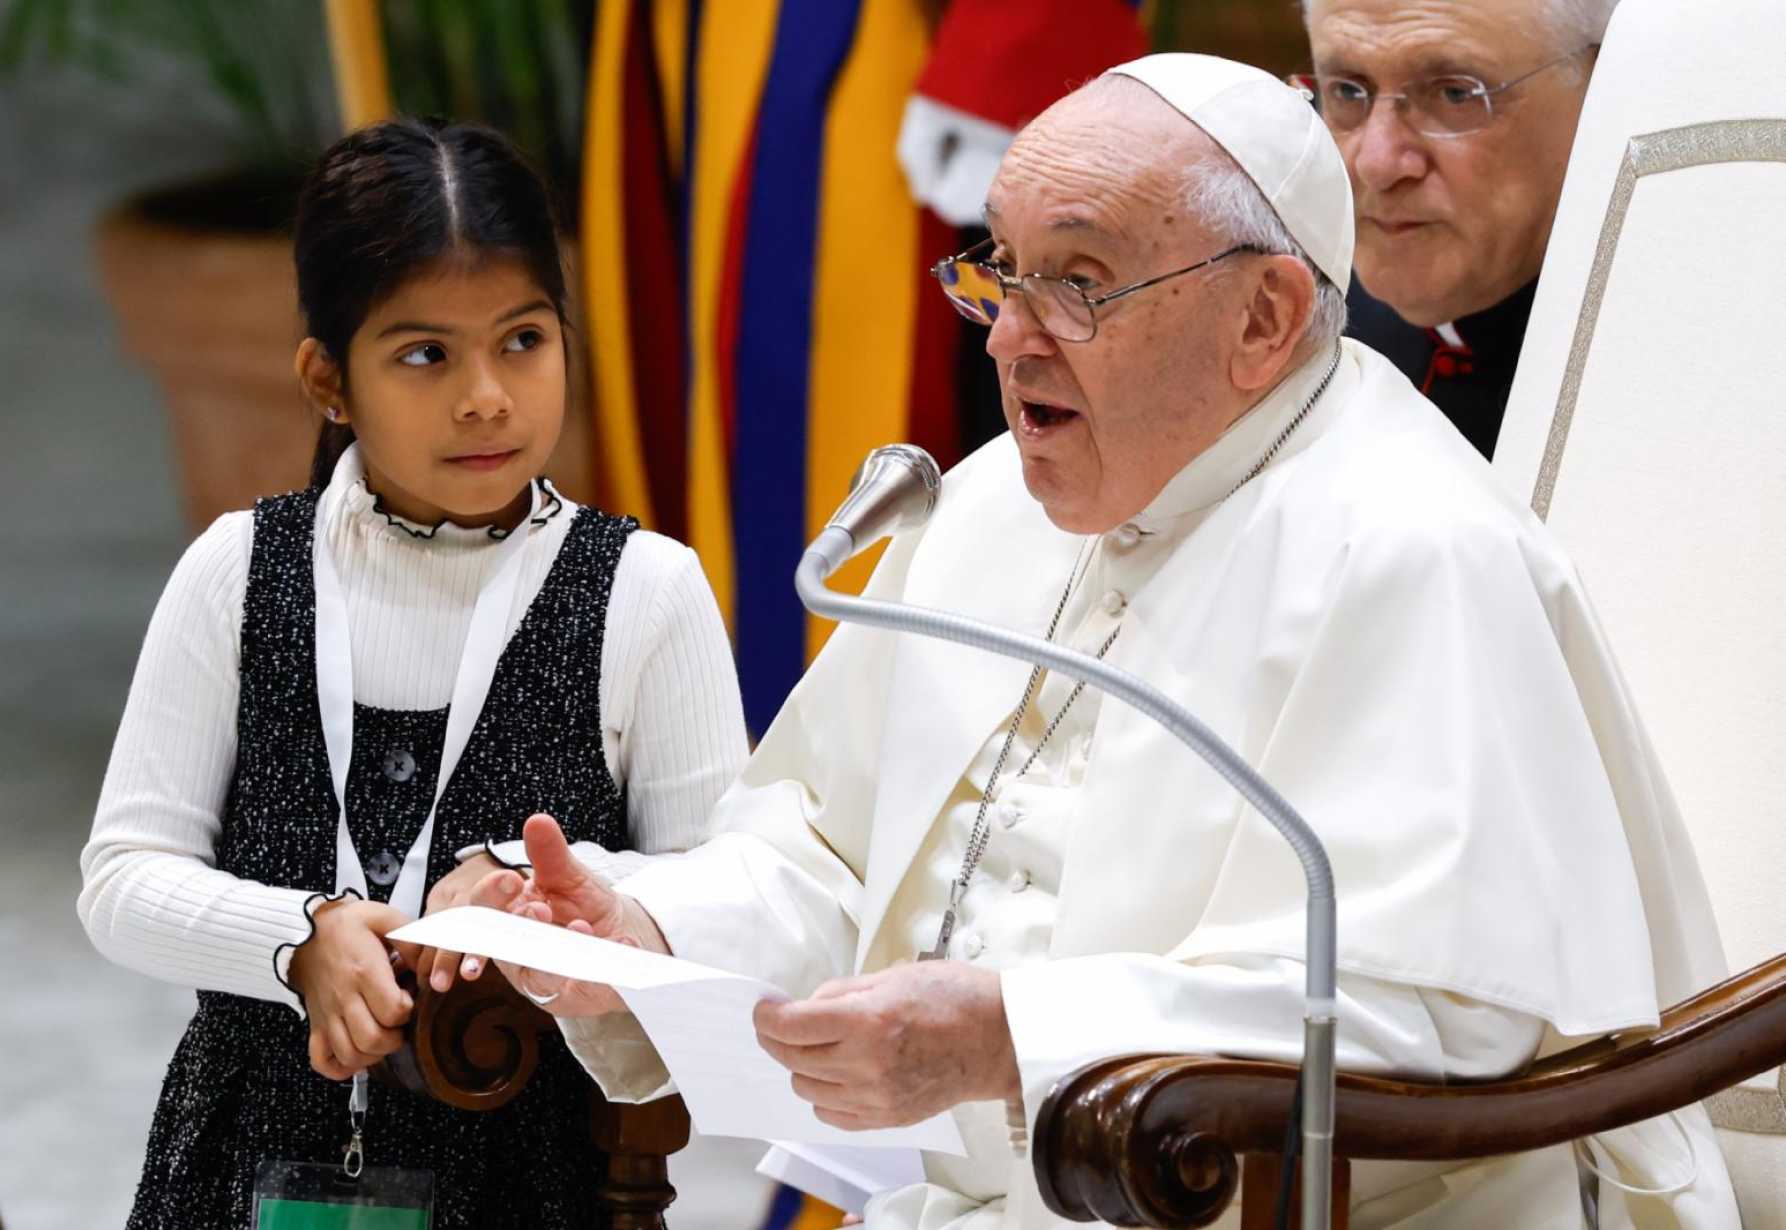 Pope encourages children to speak up, work for peace